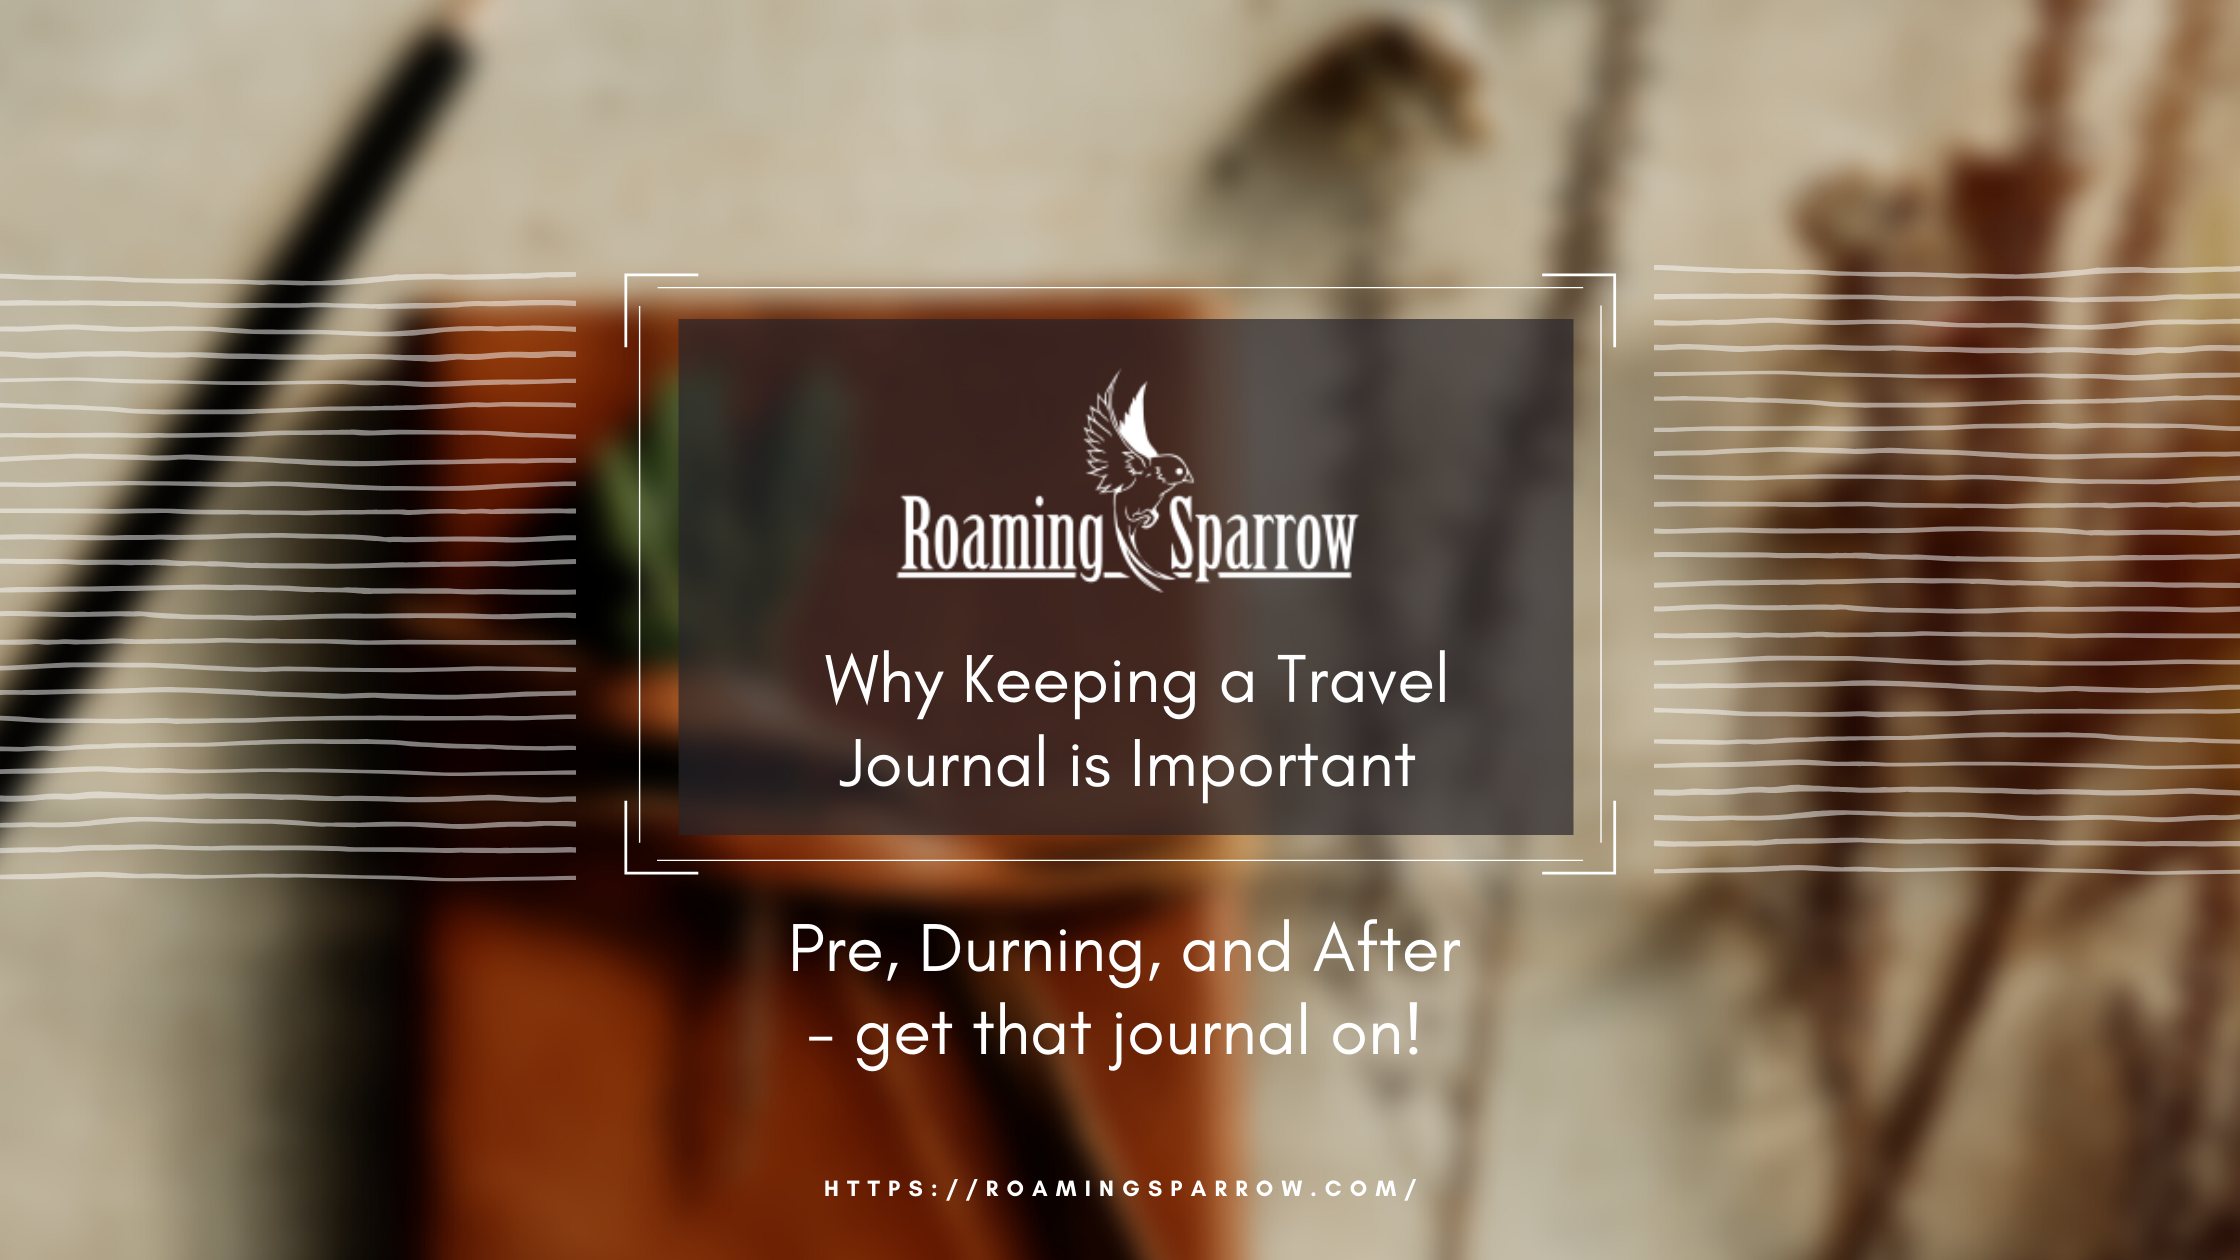  Why Keeping a Travel Journal is Important